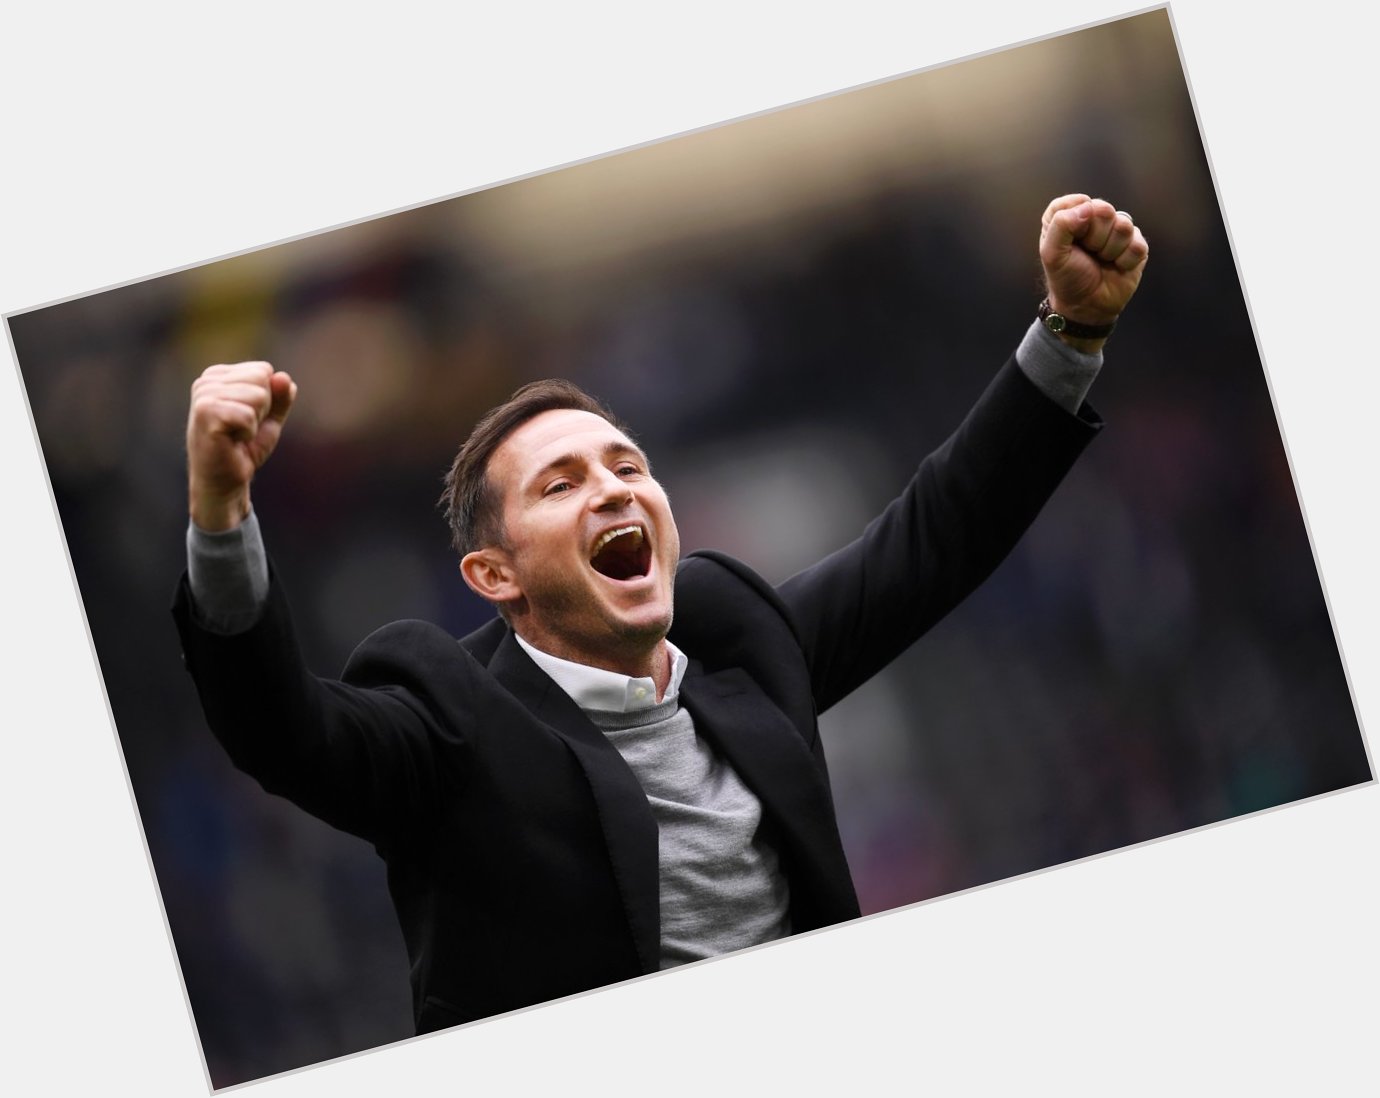 Happy 41st birthday, Frank Lampard! A return to Chelsea wouldn\t be a bad present, would it? 